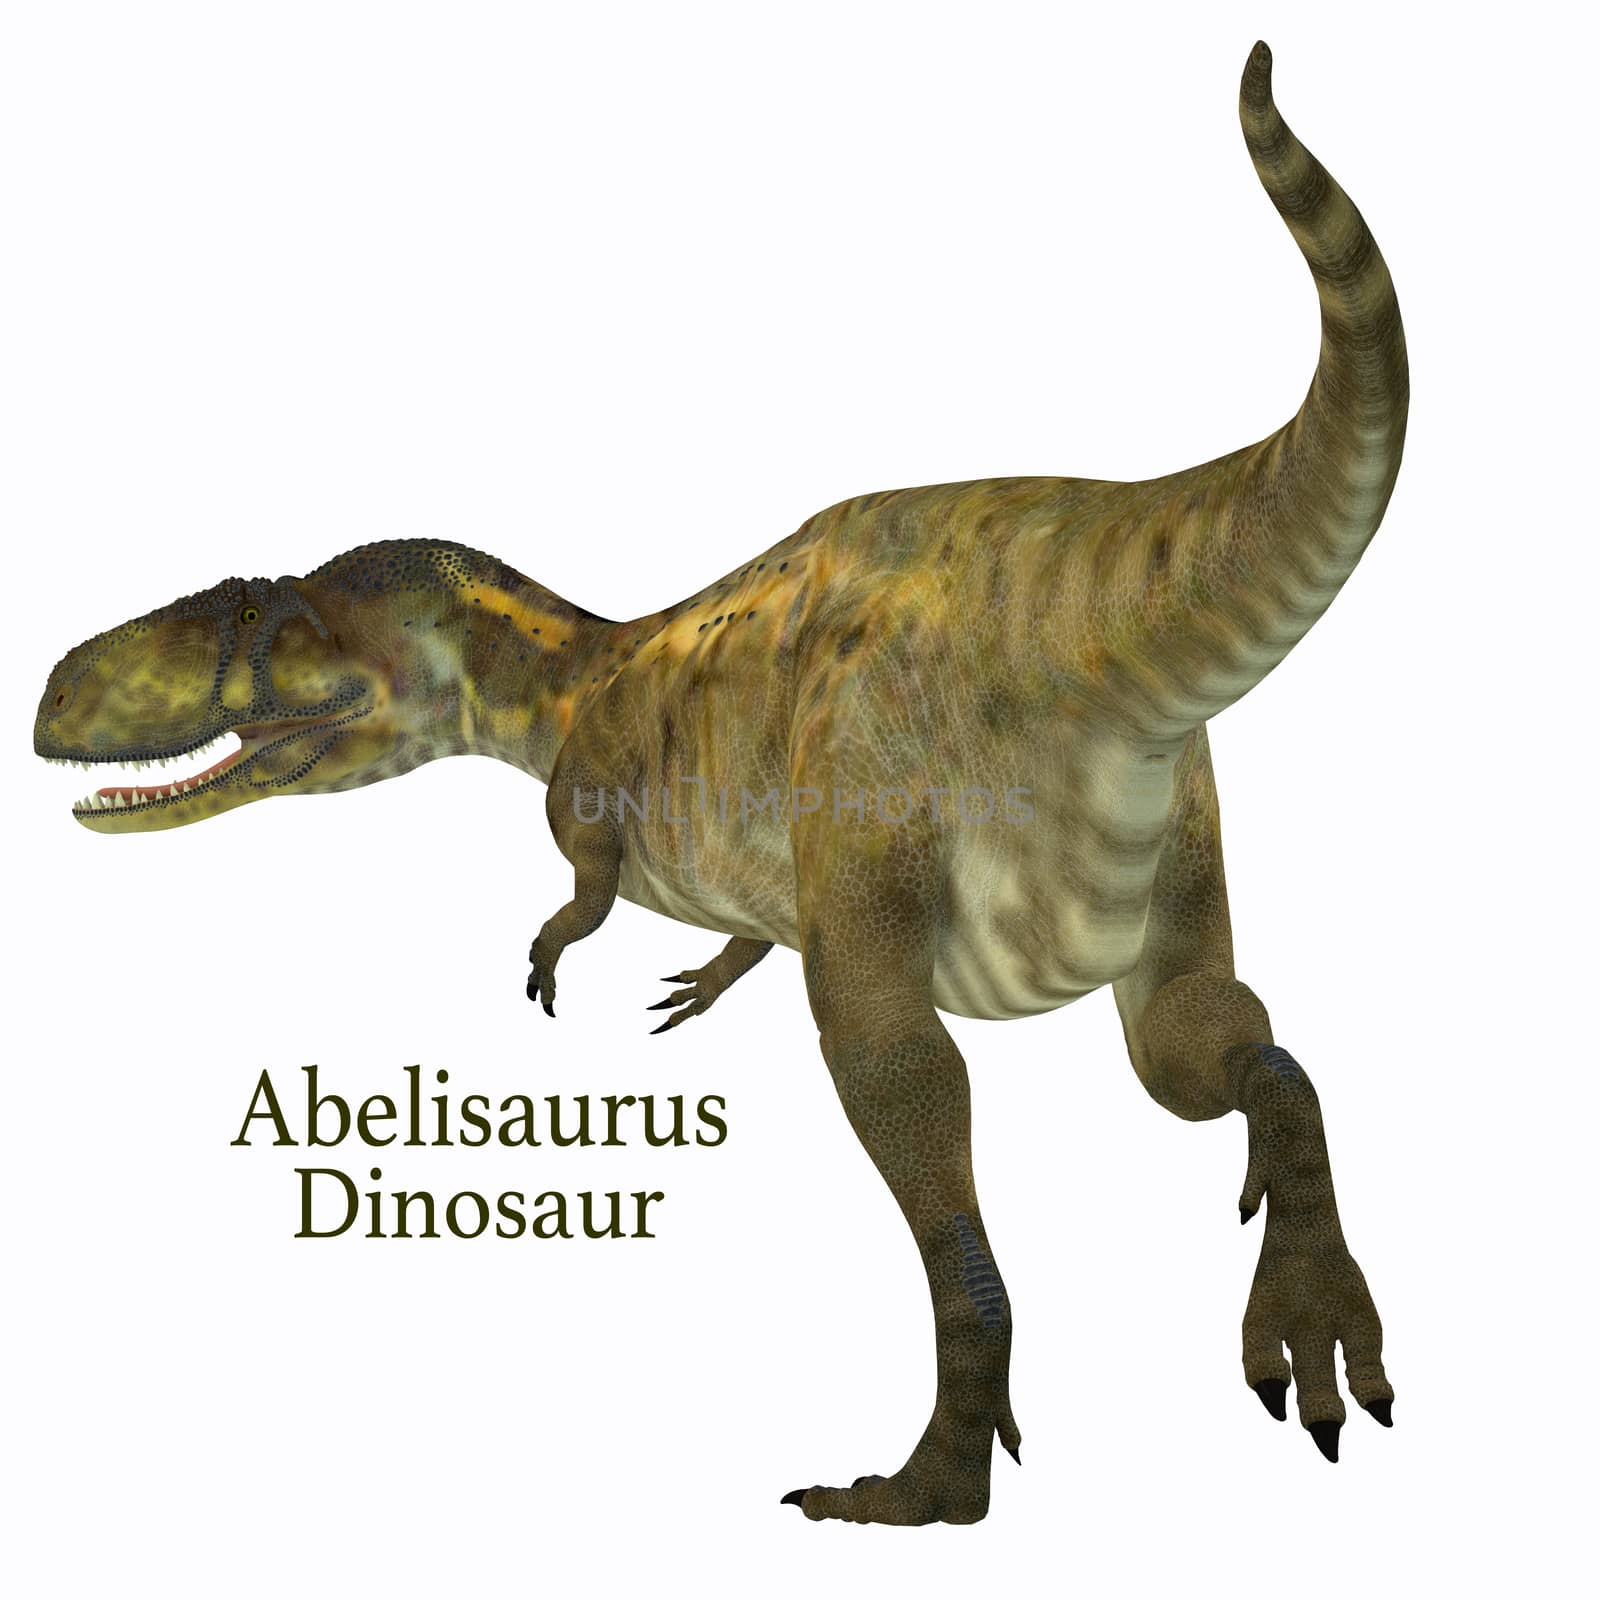 Abelisaurus was a carnivorous theropod dinosaur that lived in Argentina in the Cretaceous Period.